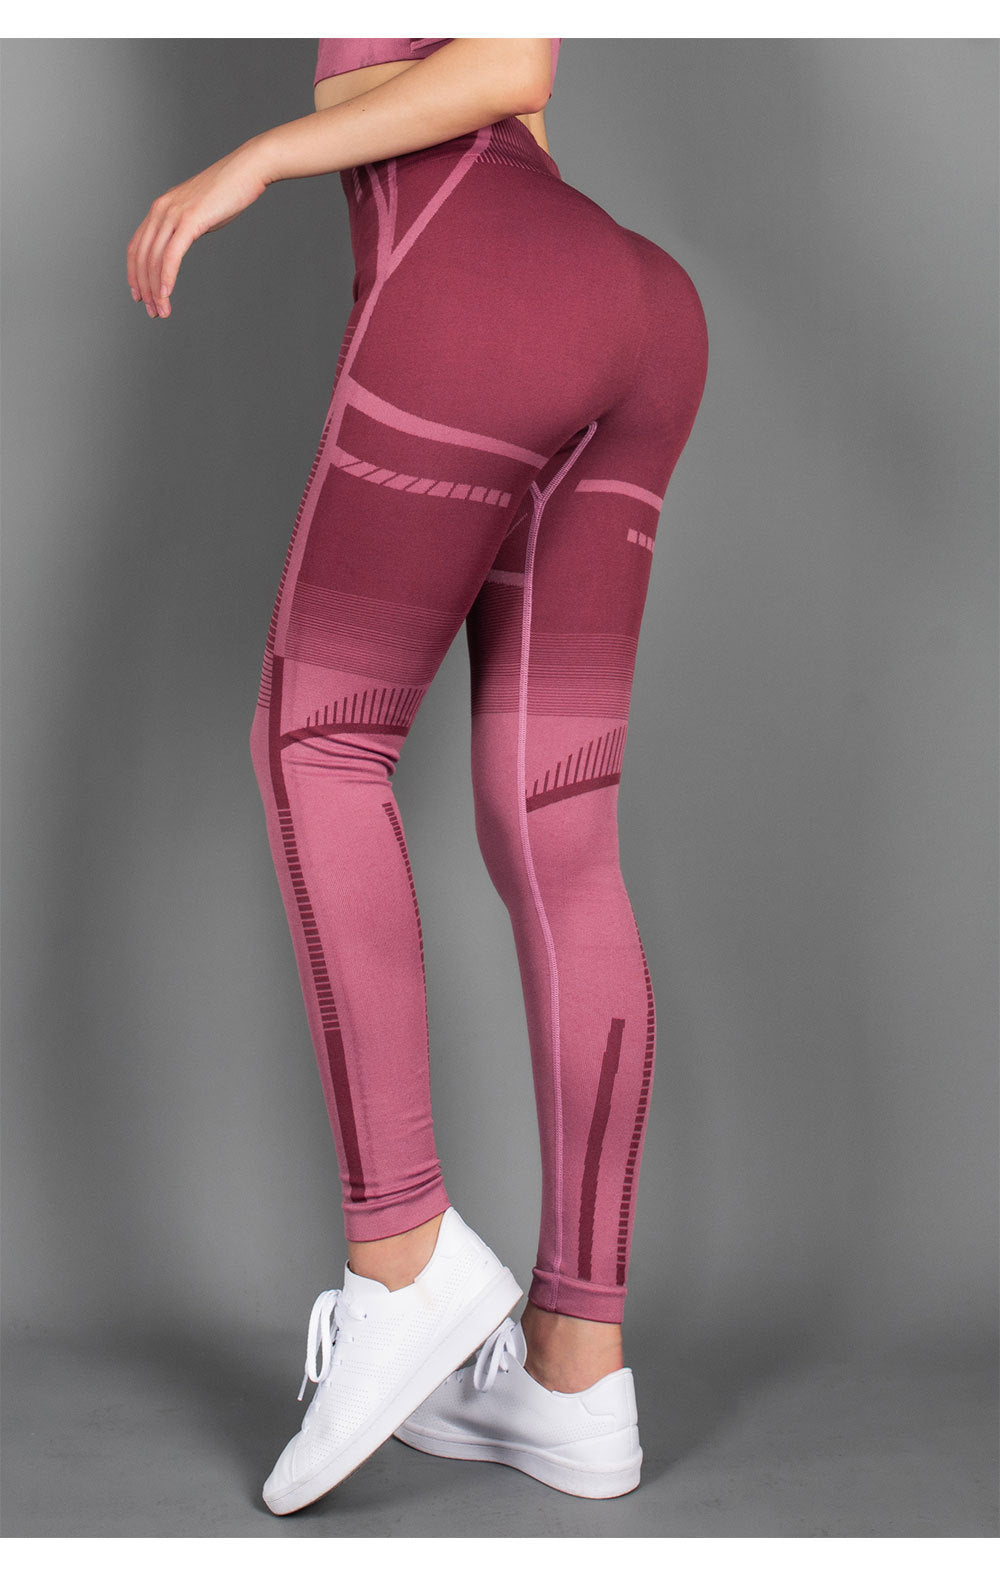 Spot  seamless knitted high elastic high waist hip lifting leisure fast drying tights fitness sports Yoga Pants Angelwarriorfitness.com